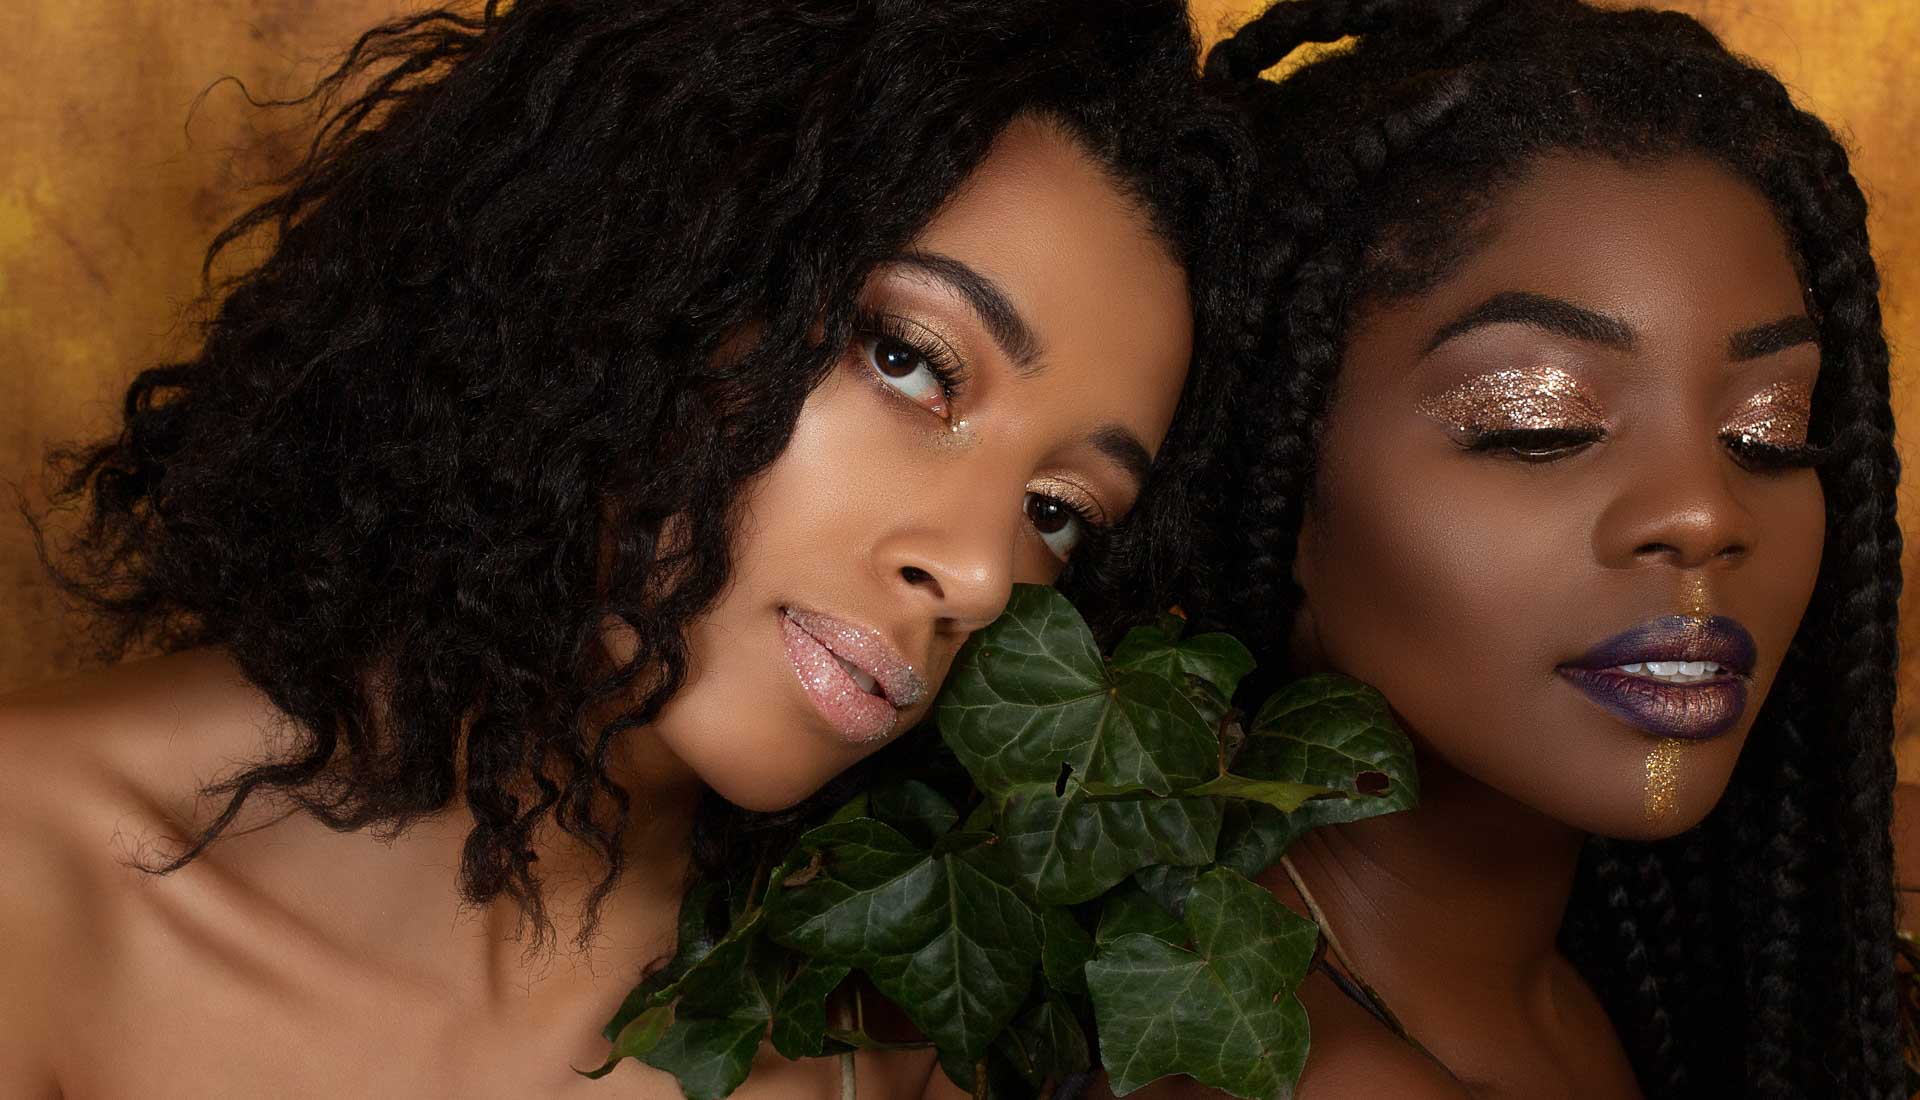 A close up beauty photo of two black young women with ivy and glitter makeup on.